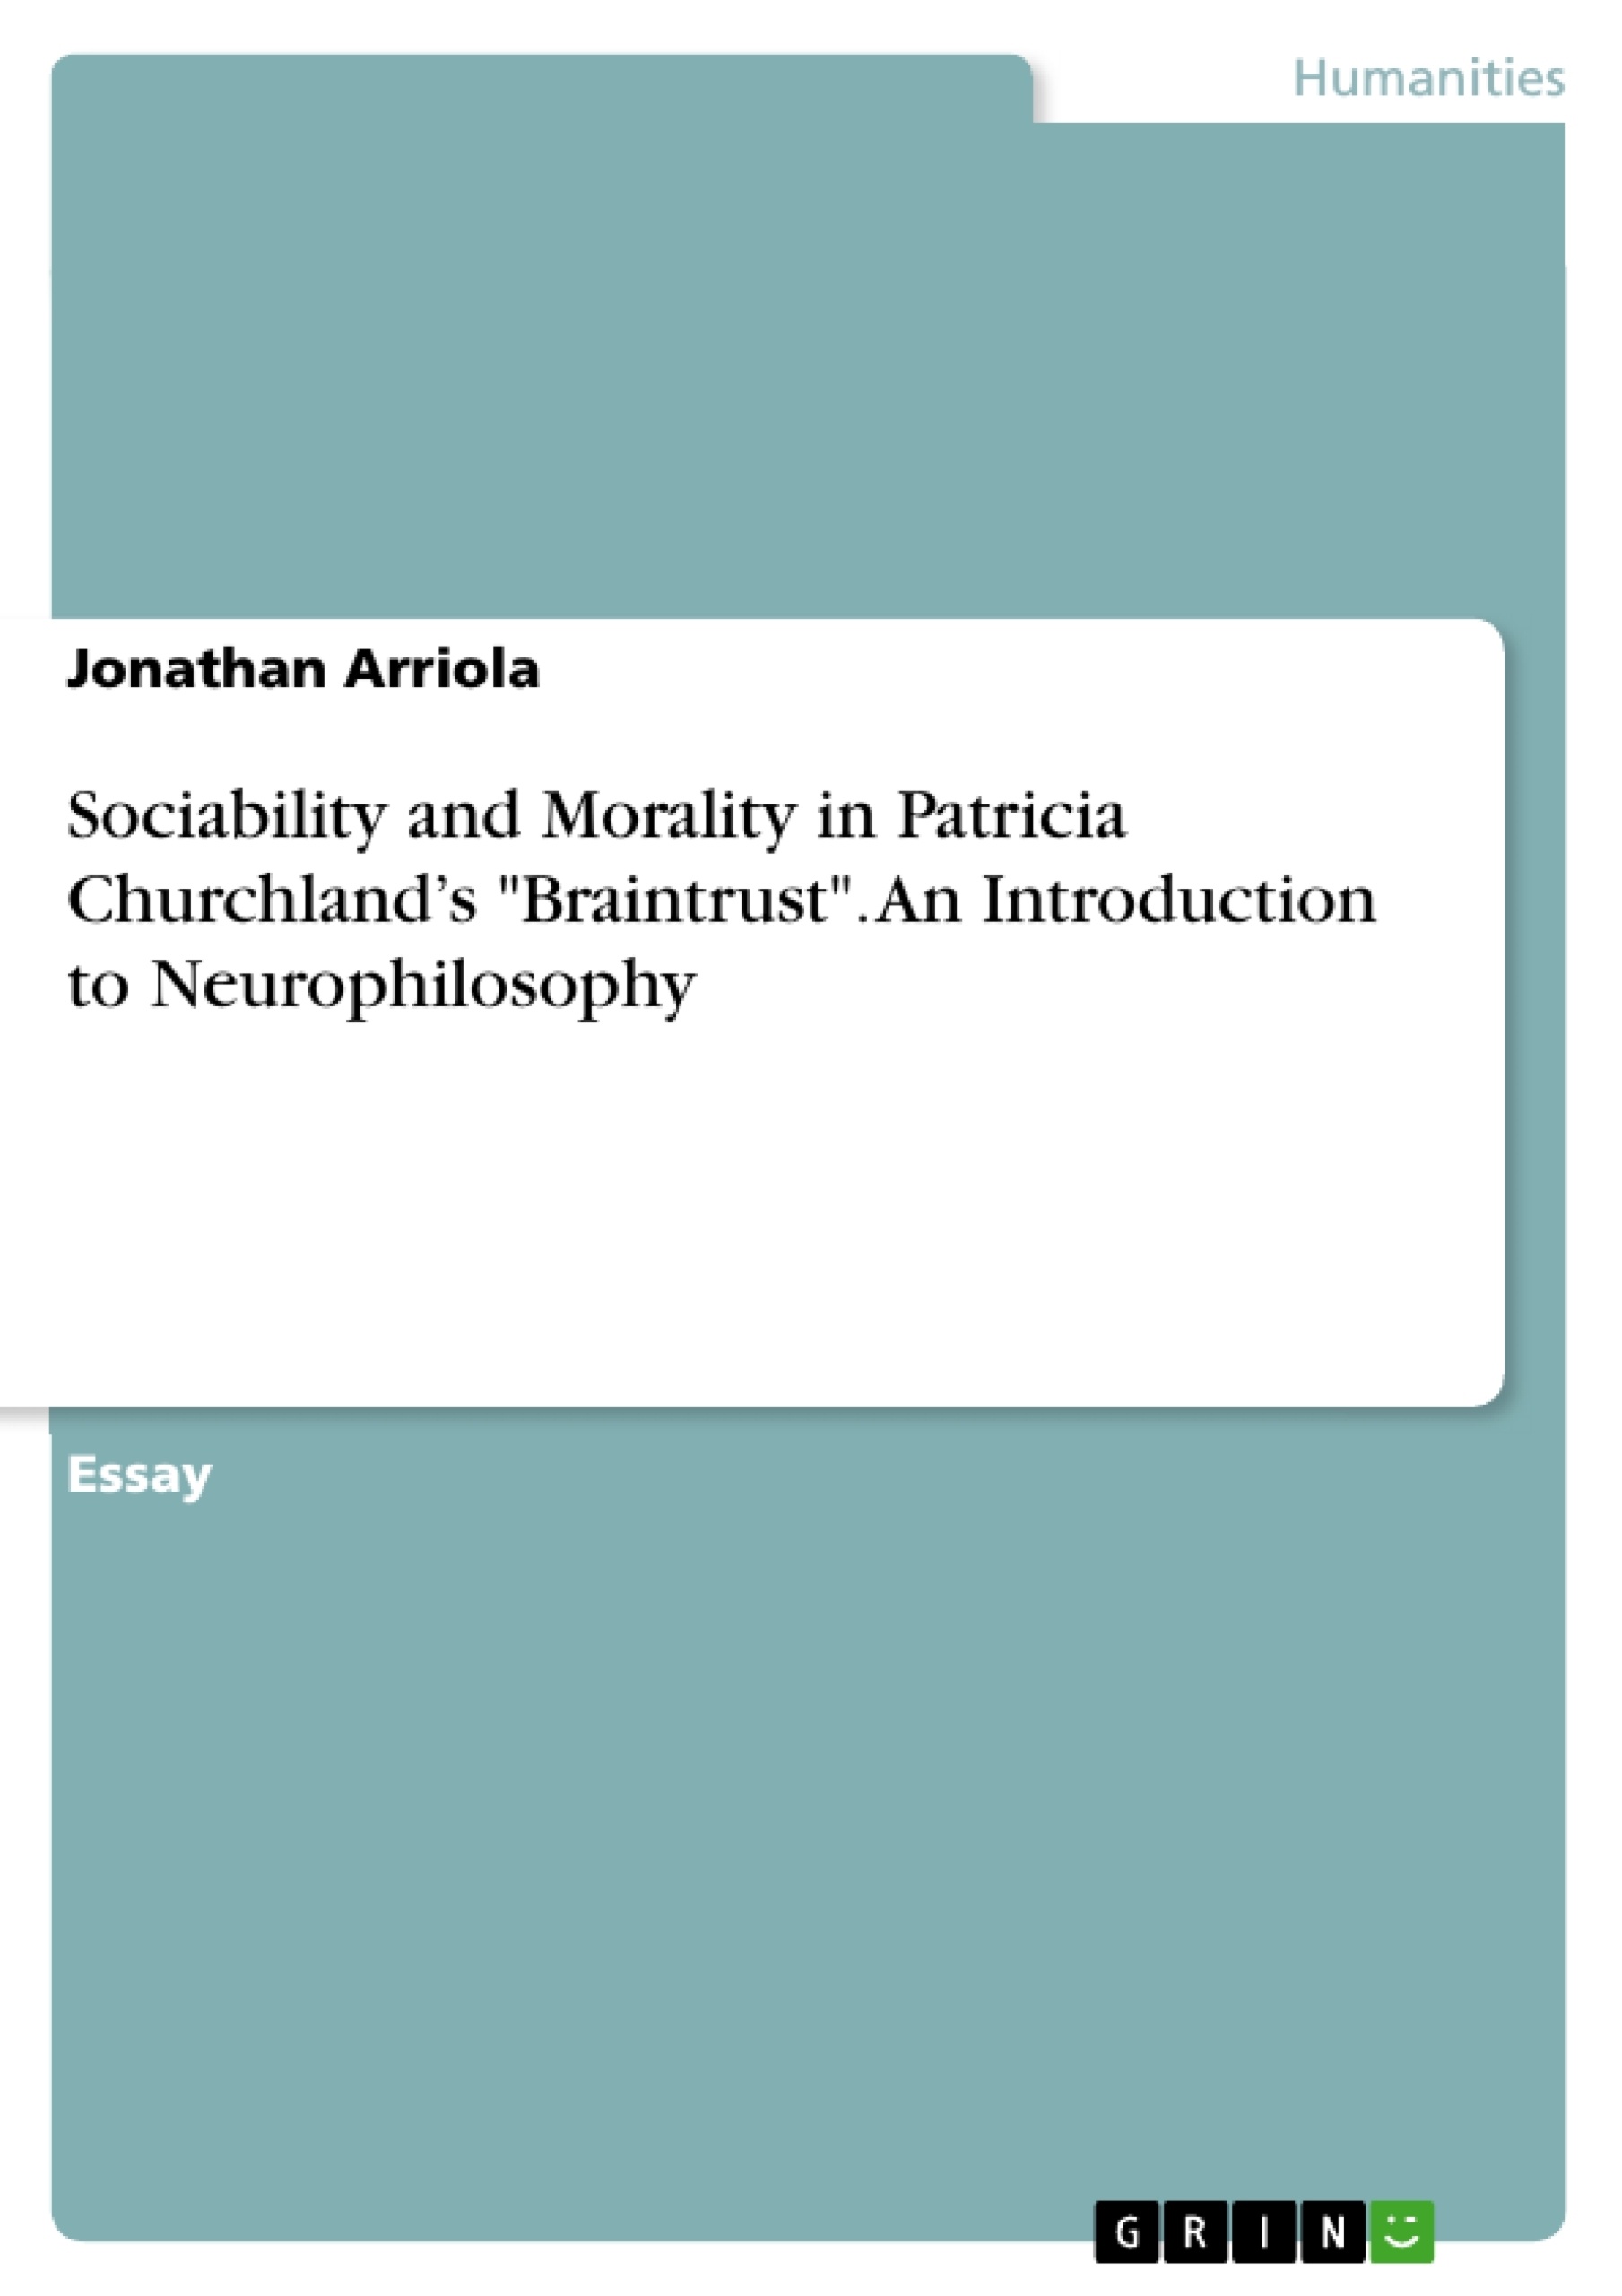 Title: Sociability and Morality in Patricia Churchland’s "Braintrust". An Introduction to Neurophilosophy